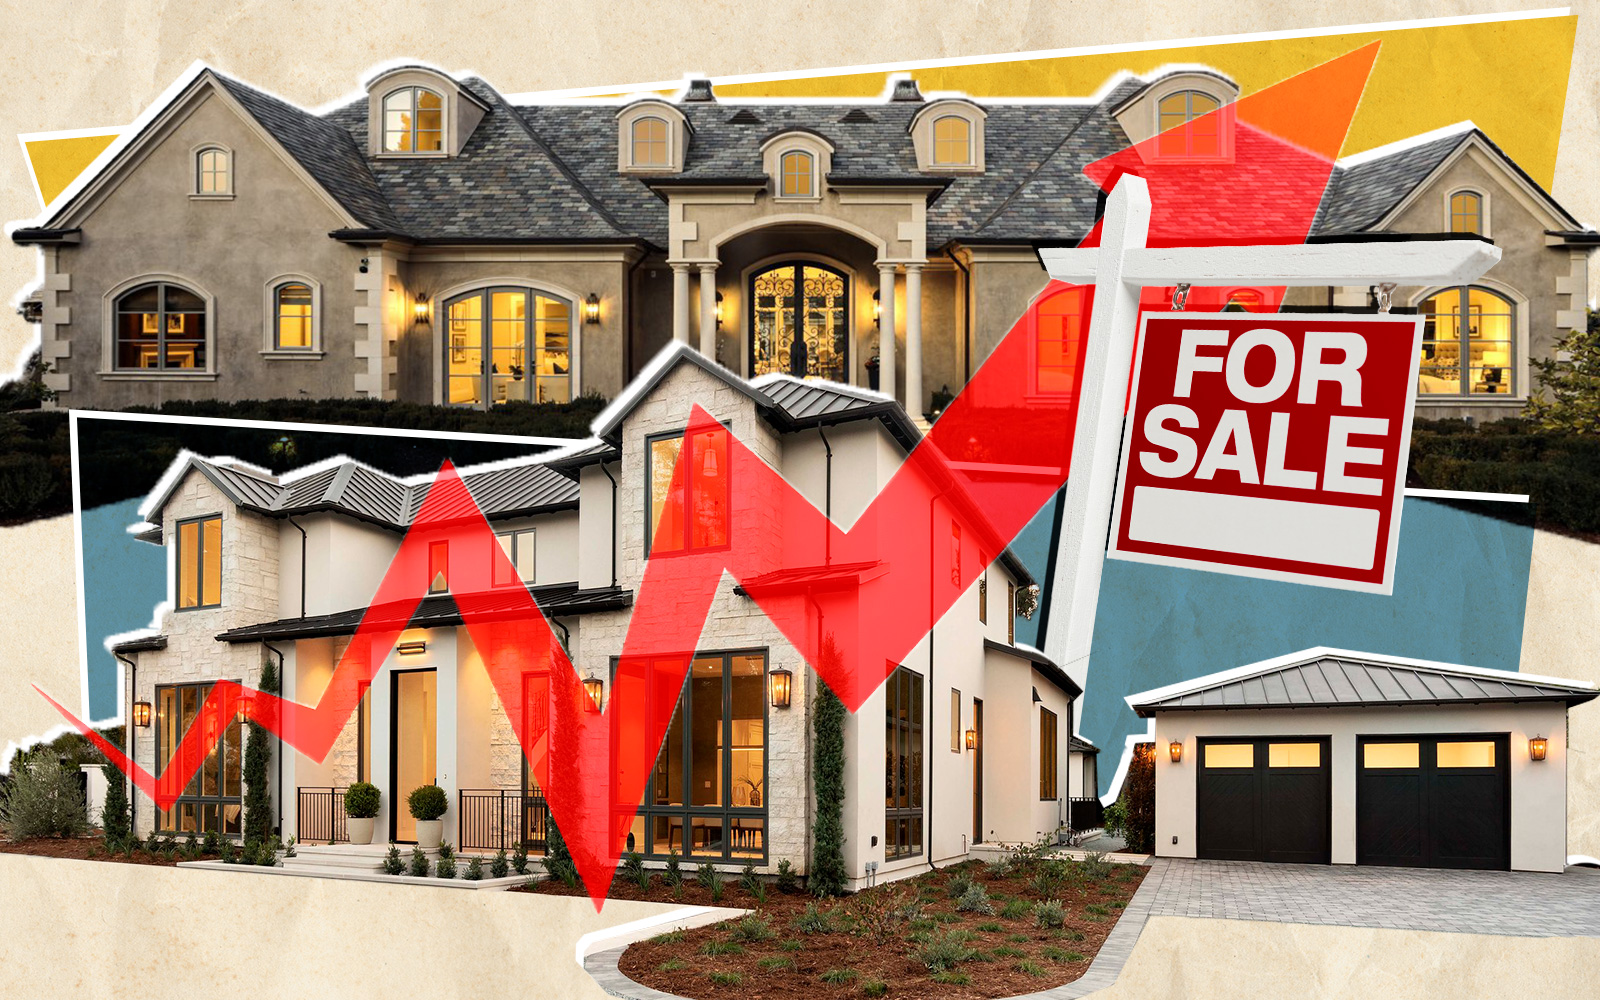 Slew of pre-spring sales recorded in nation’s priciest zip code 